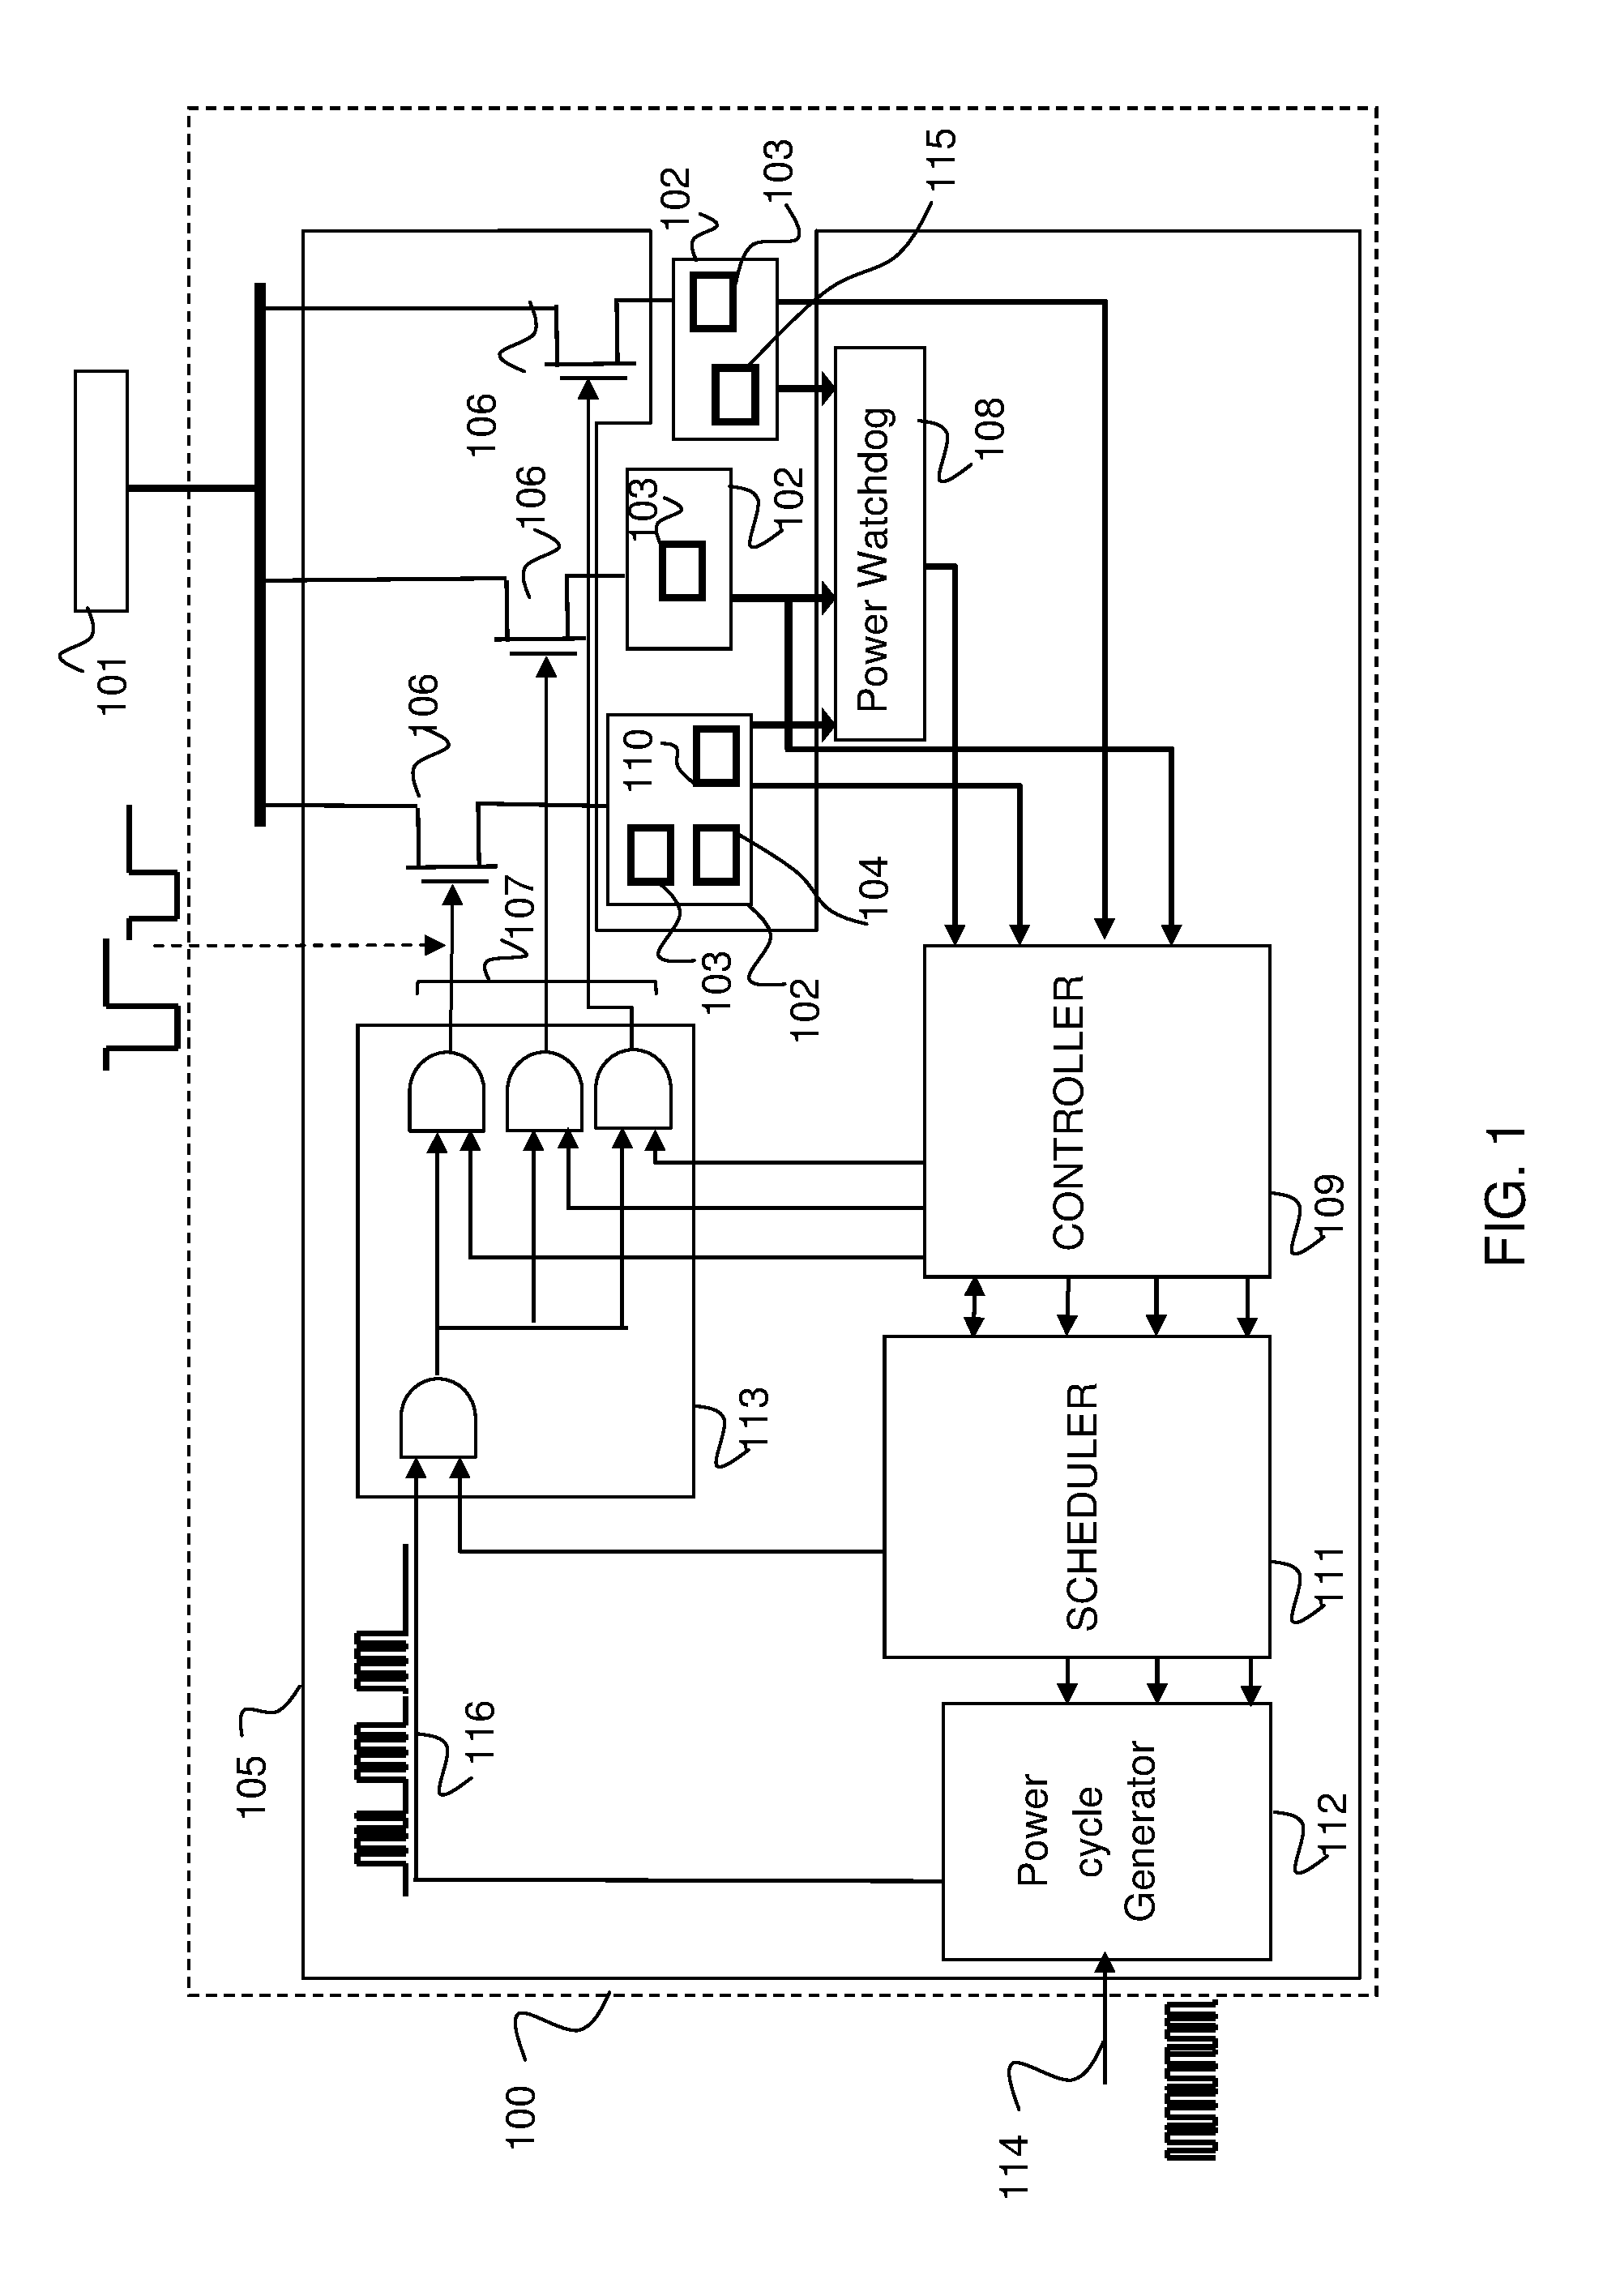 Electronic device and apparatus and method for power management of an electronic device